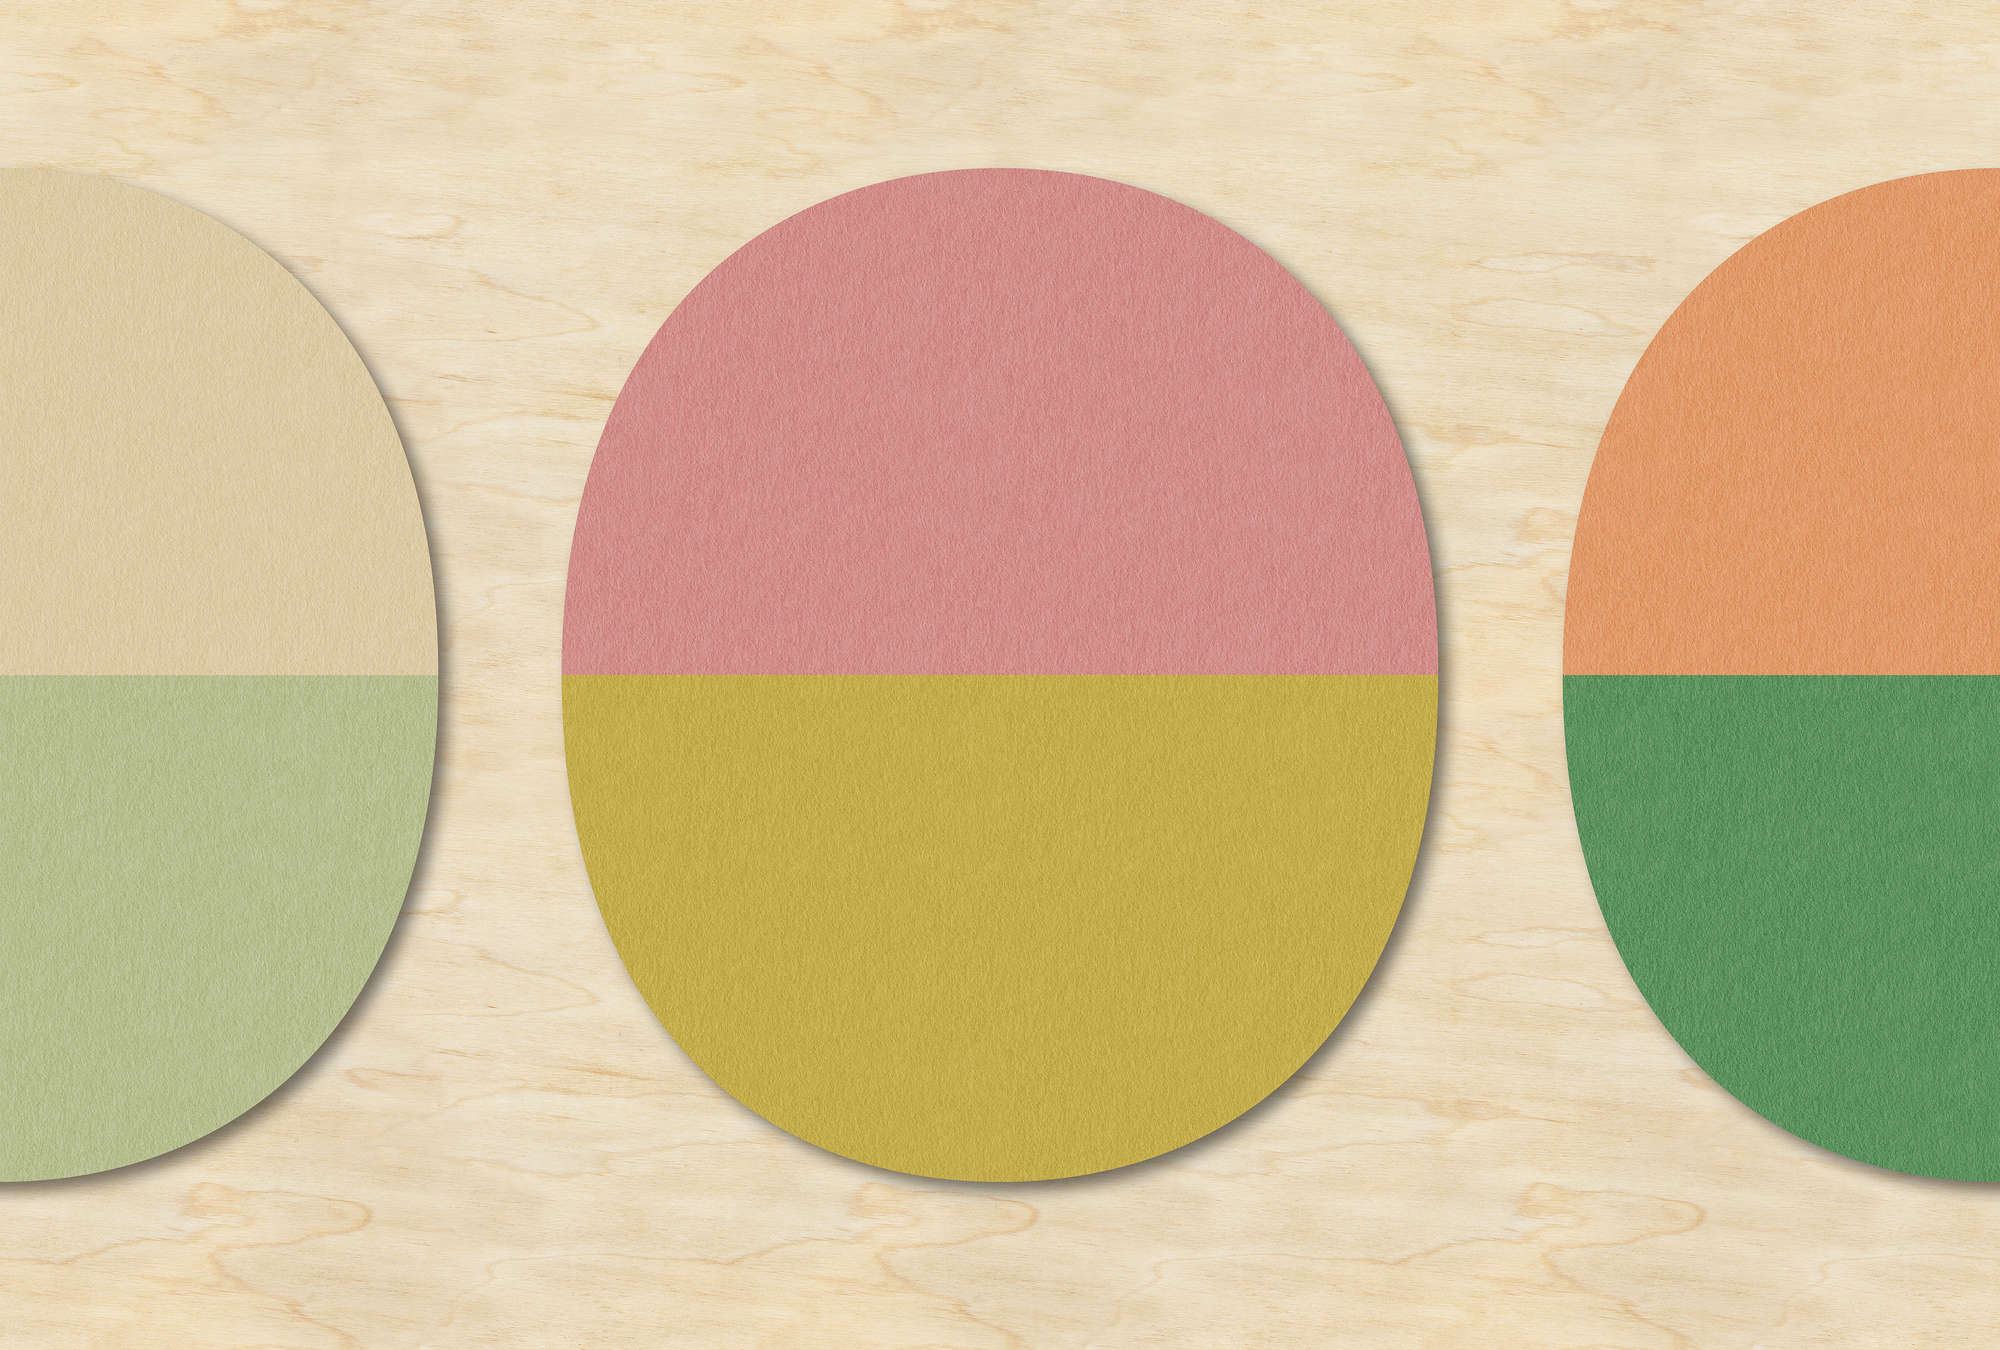             Split ovals 2 - Retro wallpaper in plywood,felt structure with colourful ovals - Beige, Green | Premium smooth fleece
        